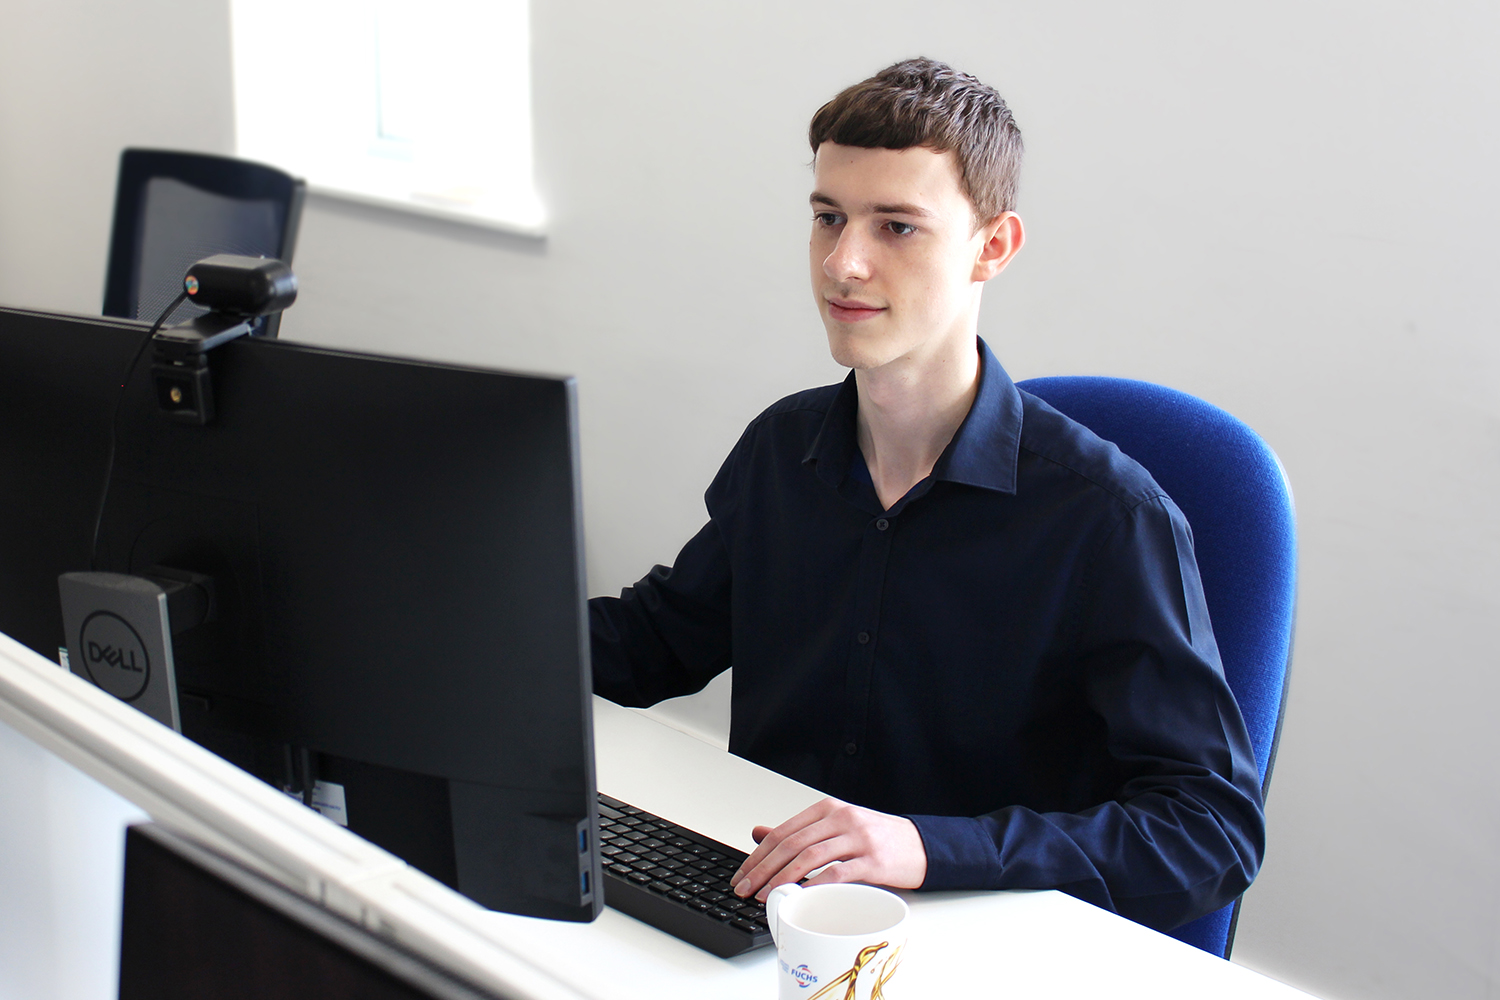 technical administration apprentice working on computer in office